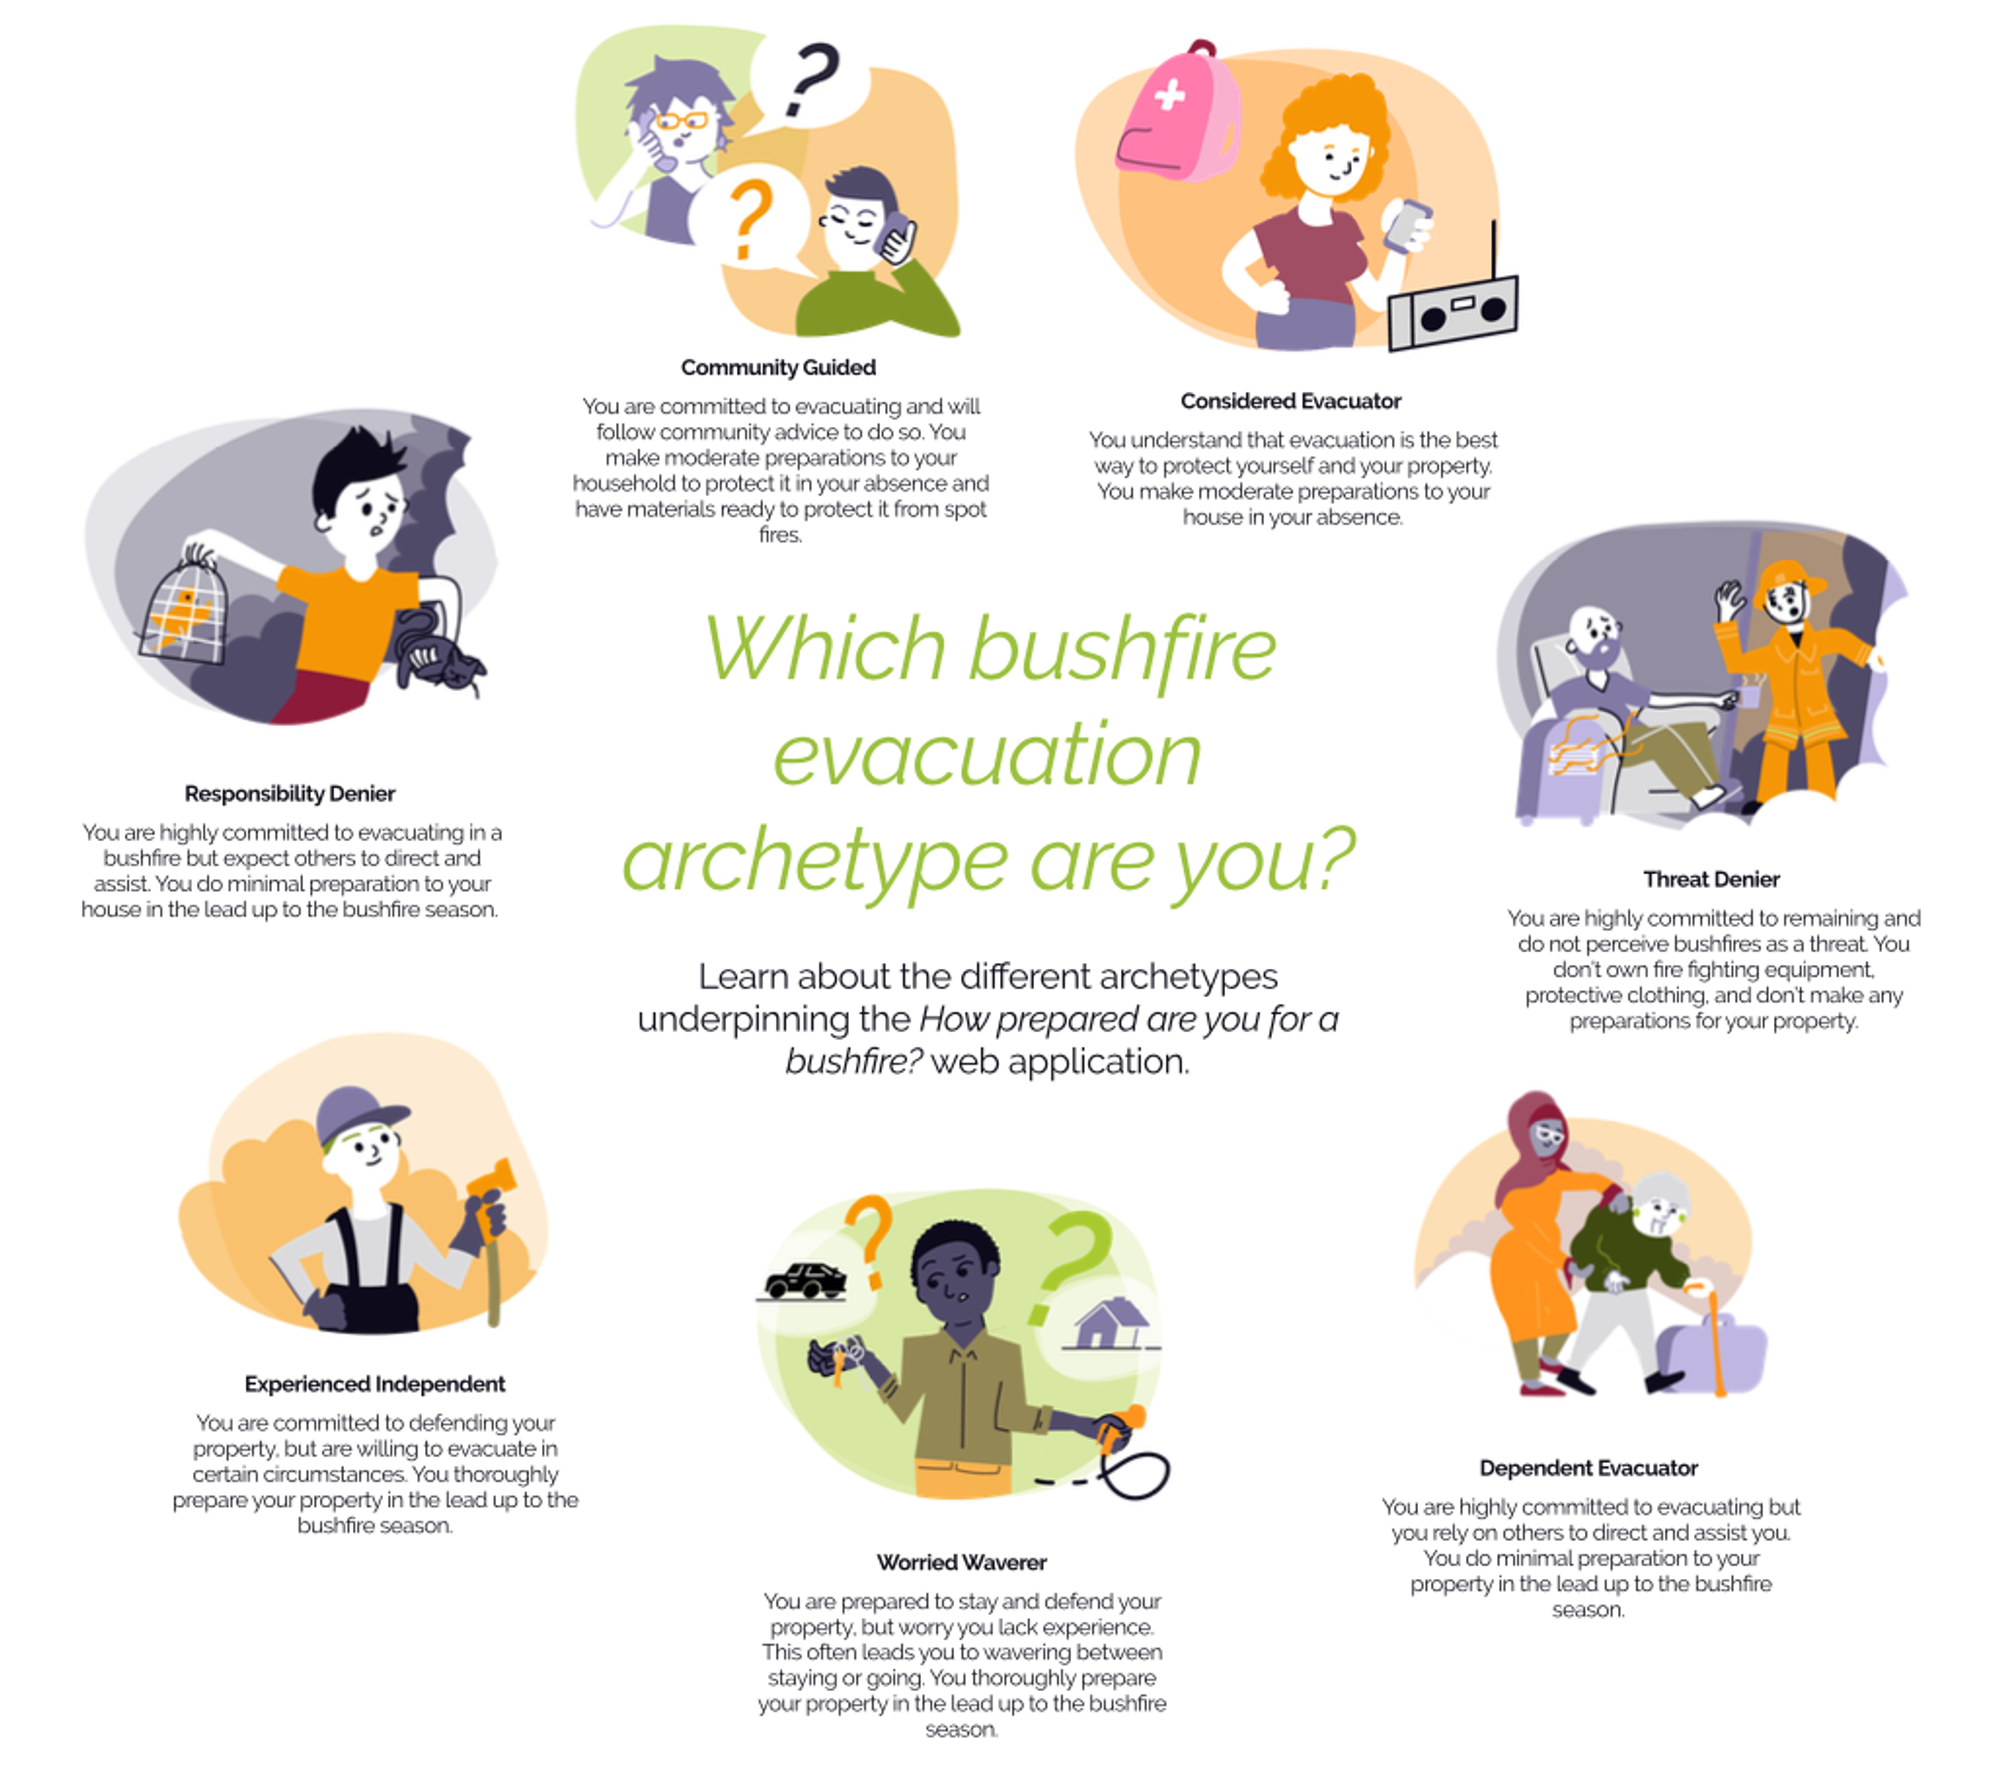 Summary of the Bushfire Archetypes. Click to see zoom in.